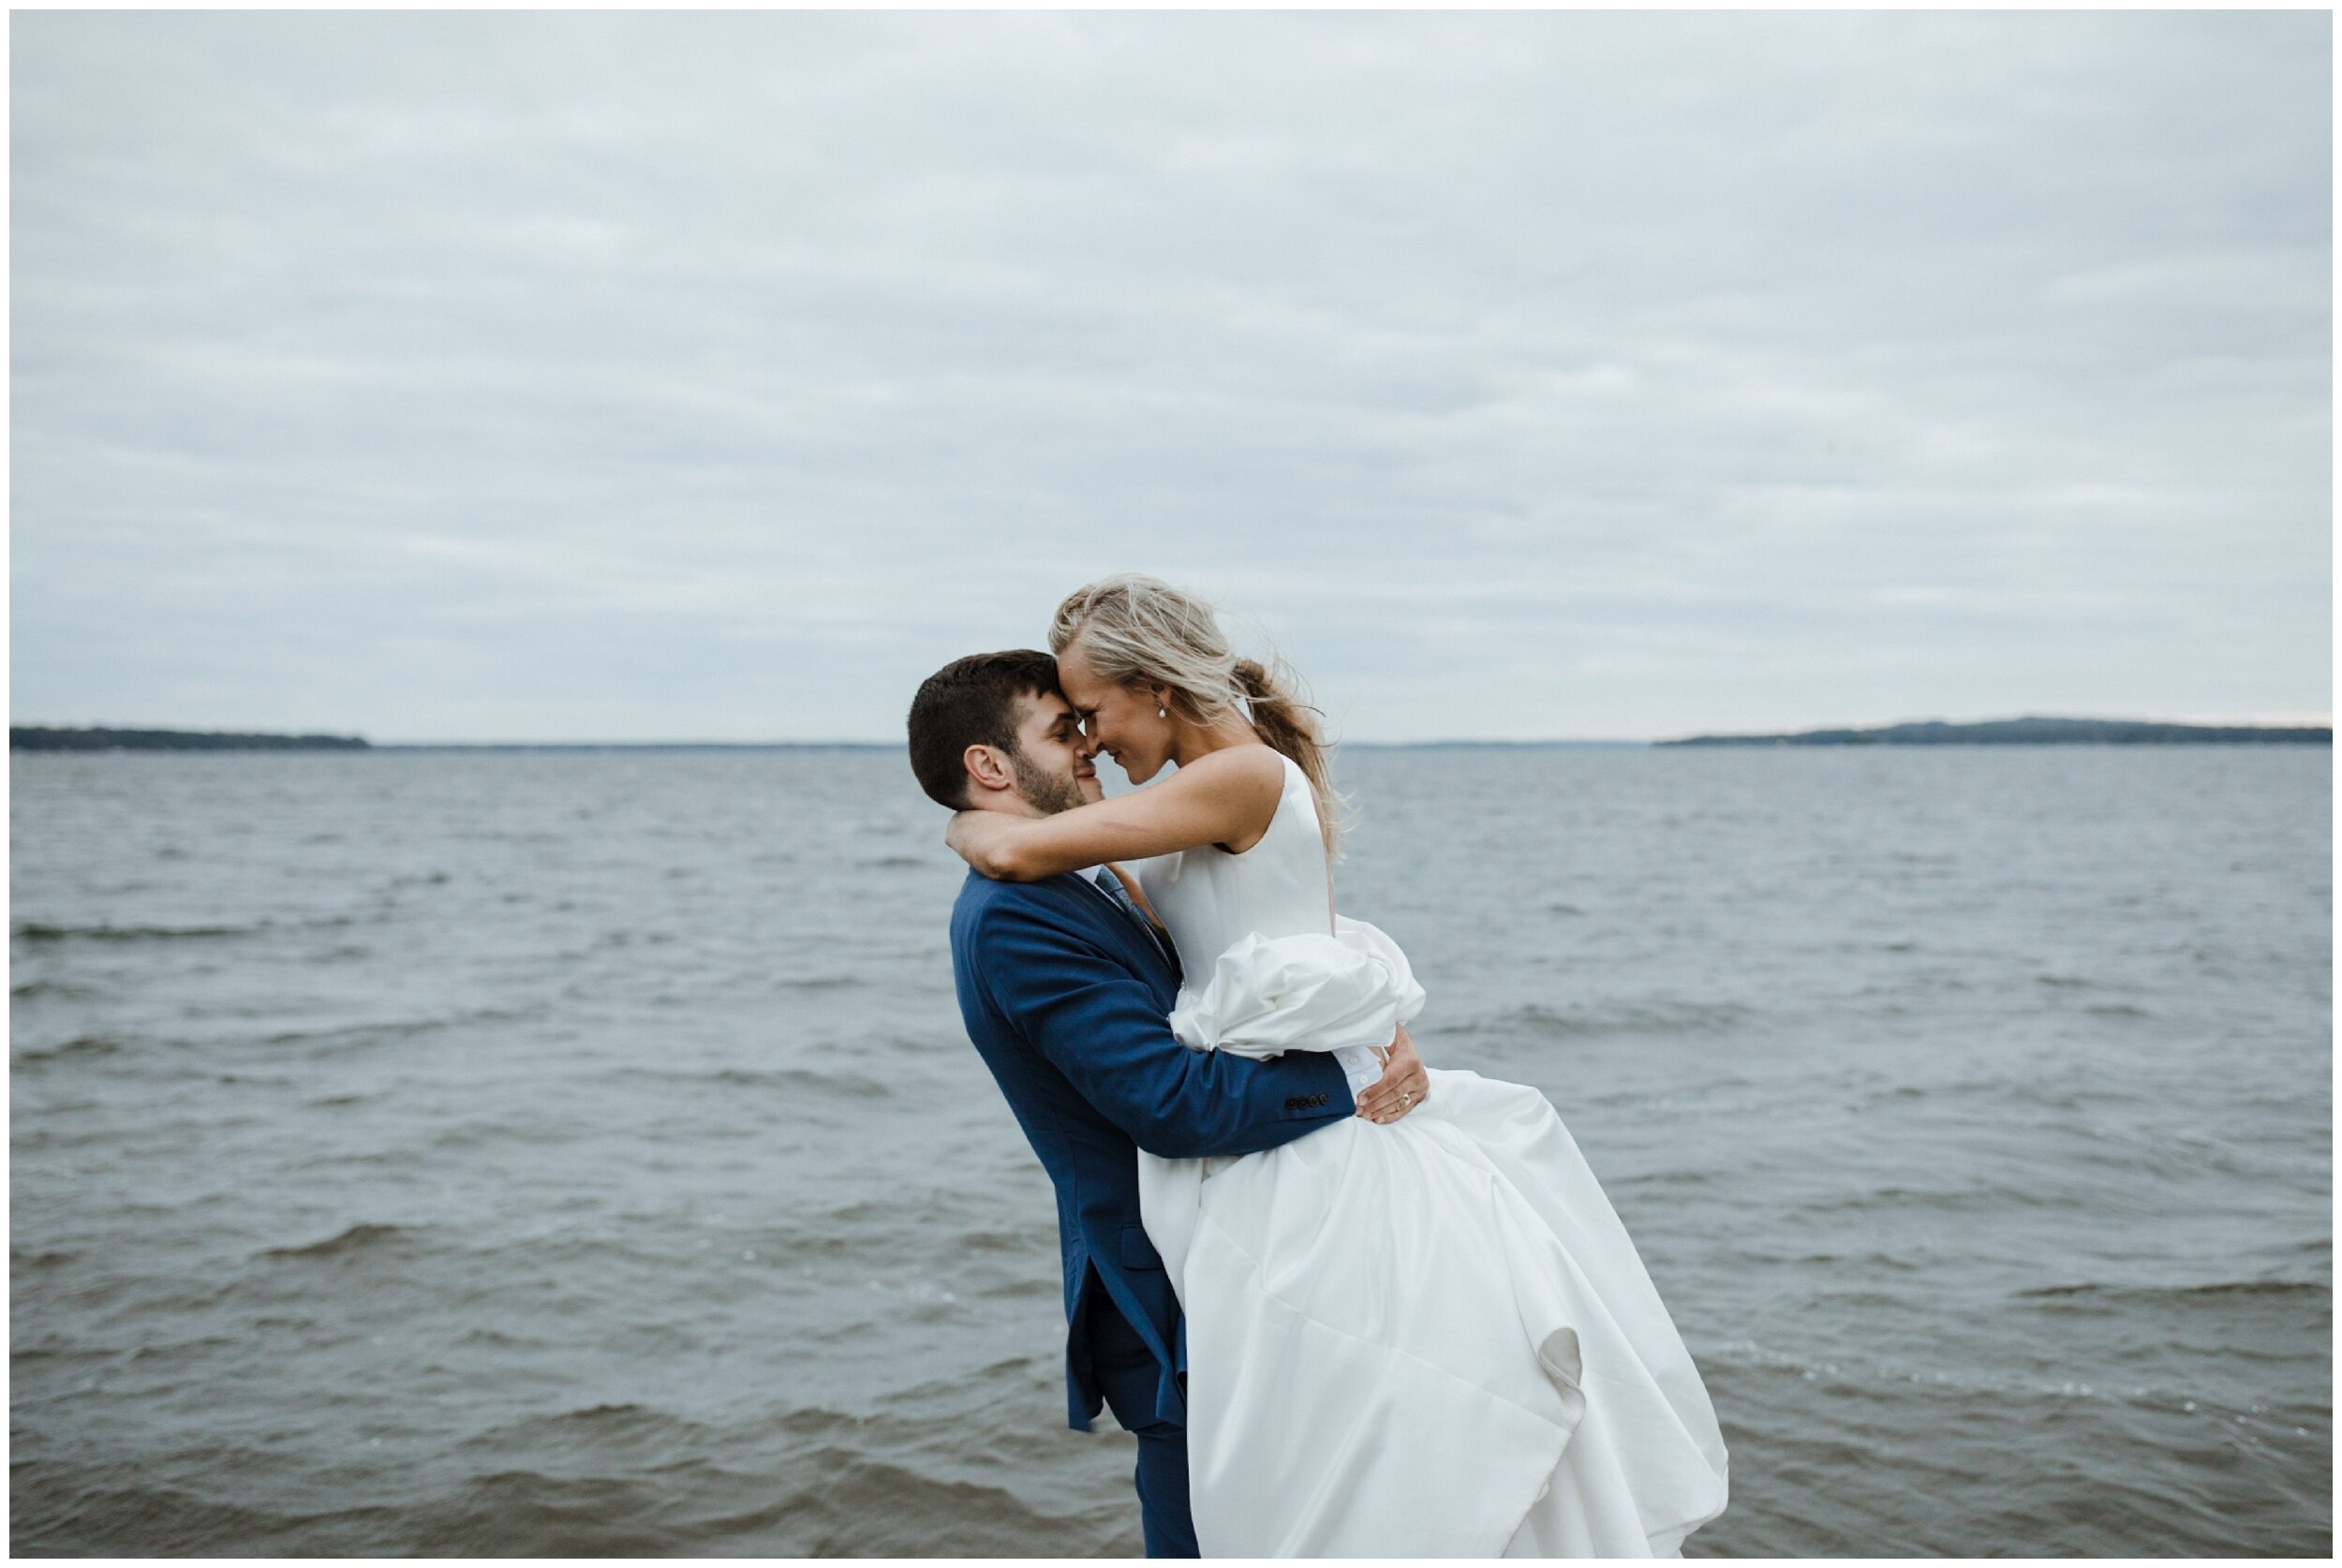 Groom lifting bride up and kissing her on Gull Lake beach during Grand View Lodge wedding